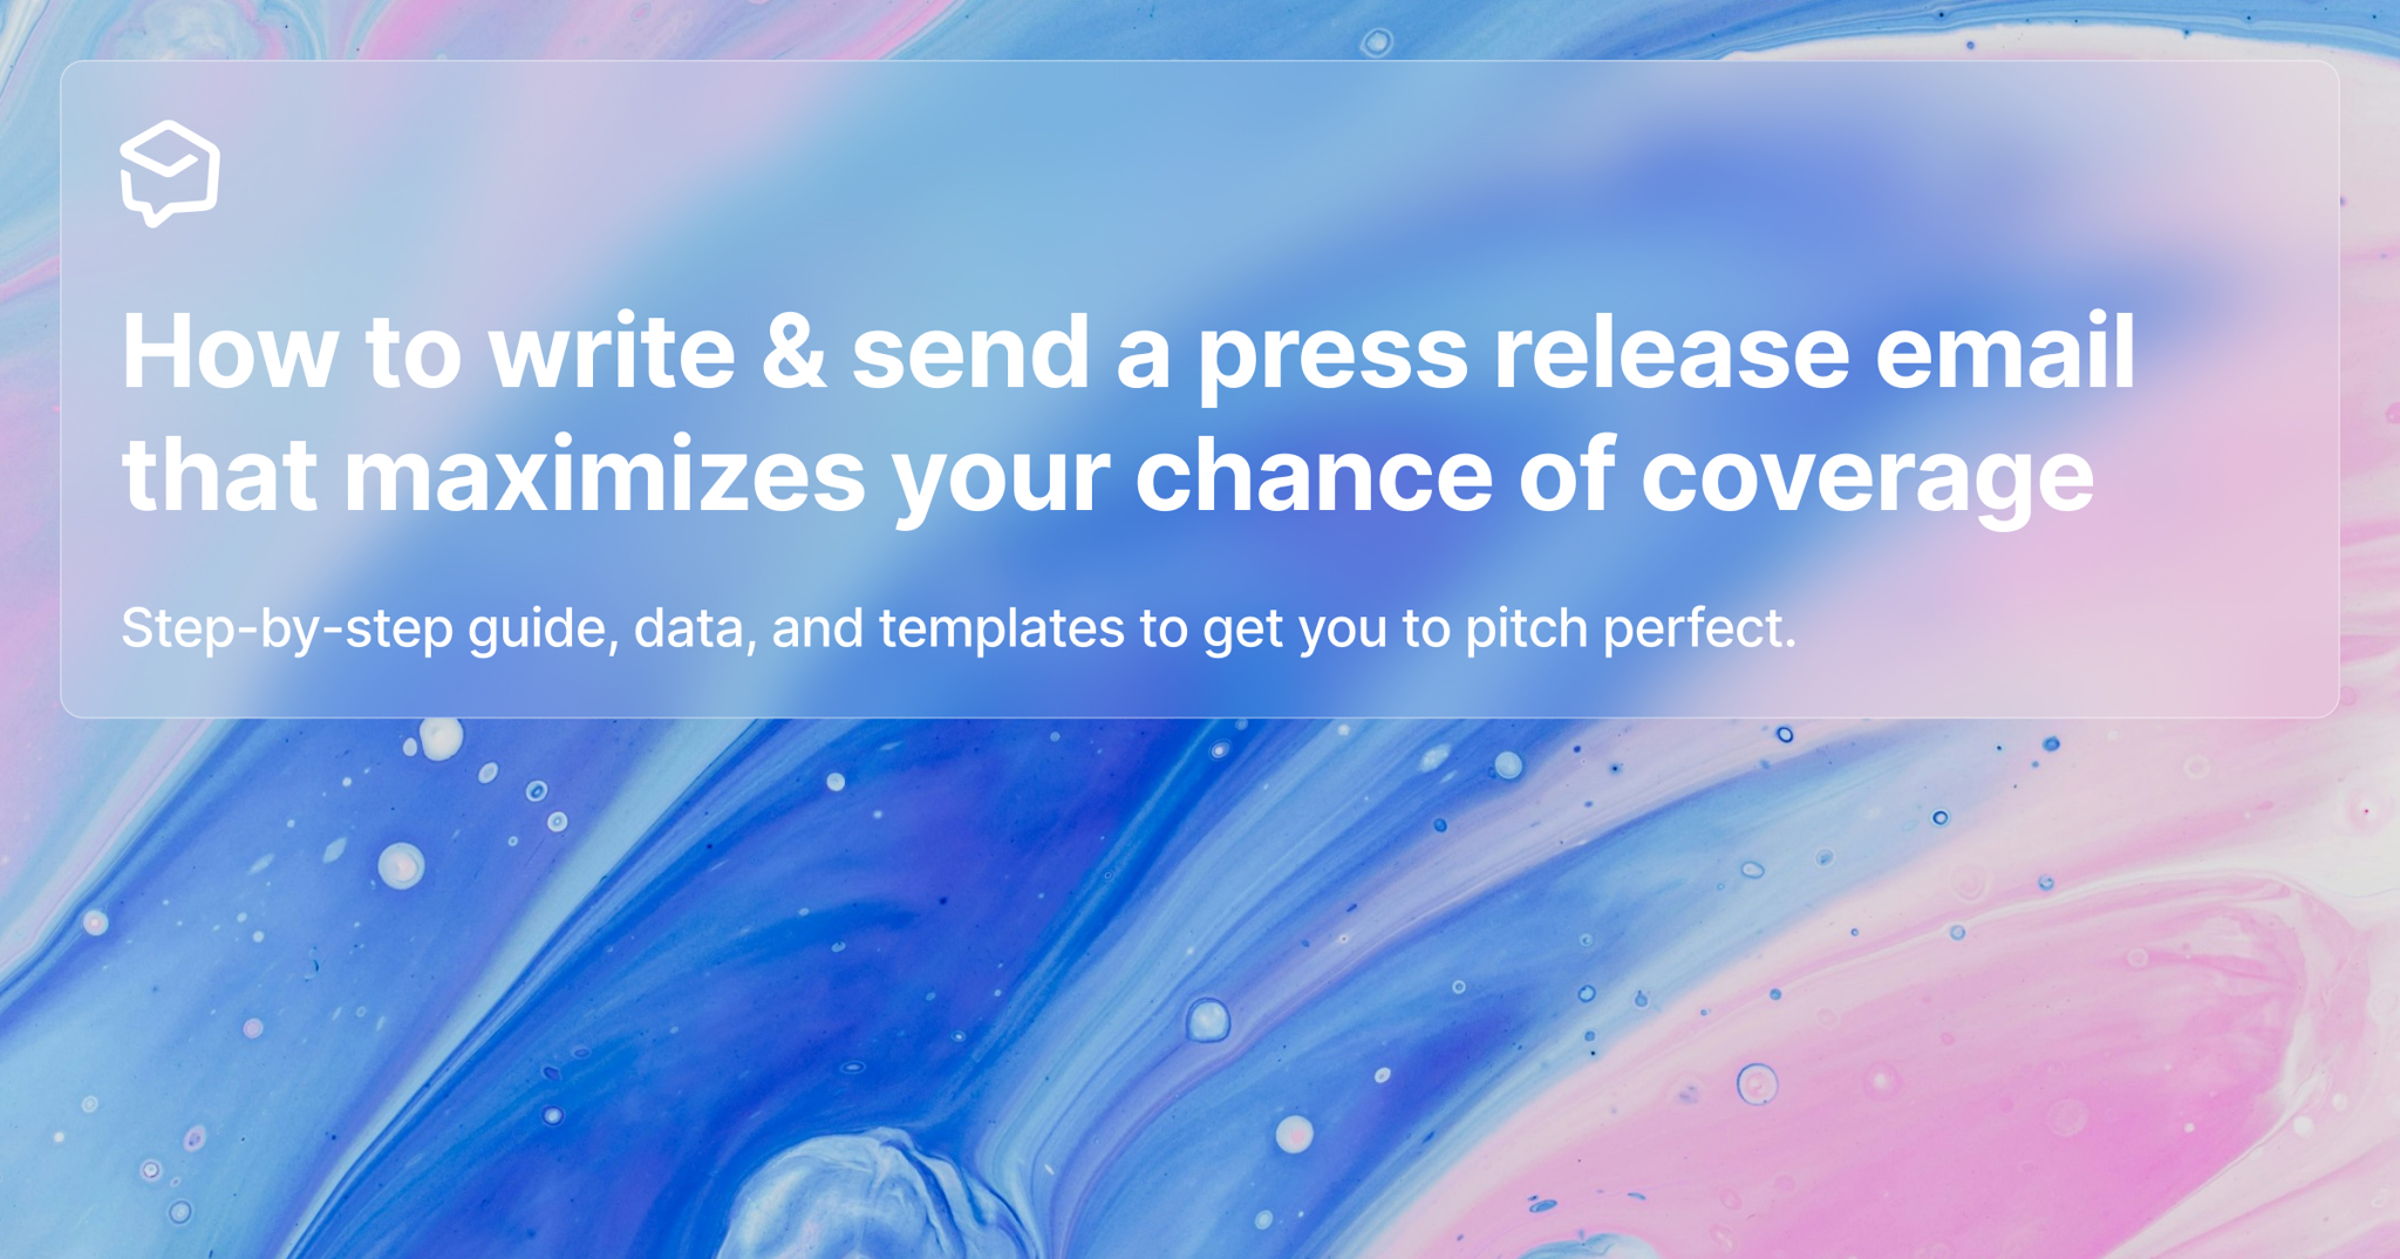 How to write & send a press release email pitch that maximizes your chances of media coverage